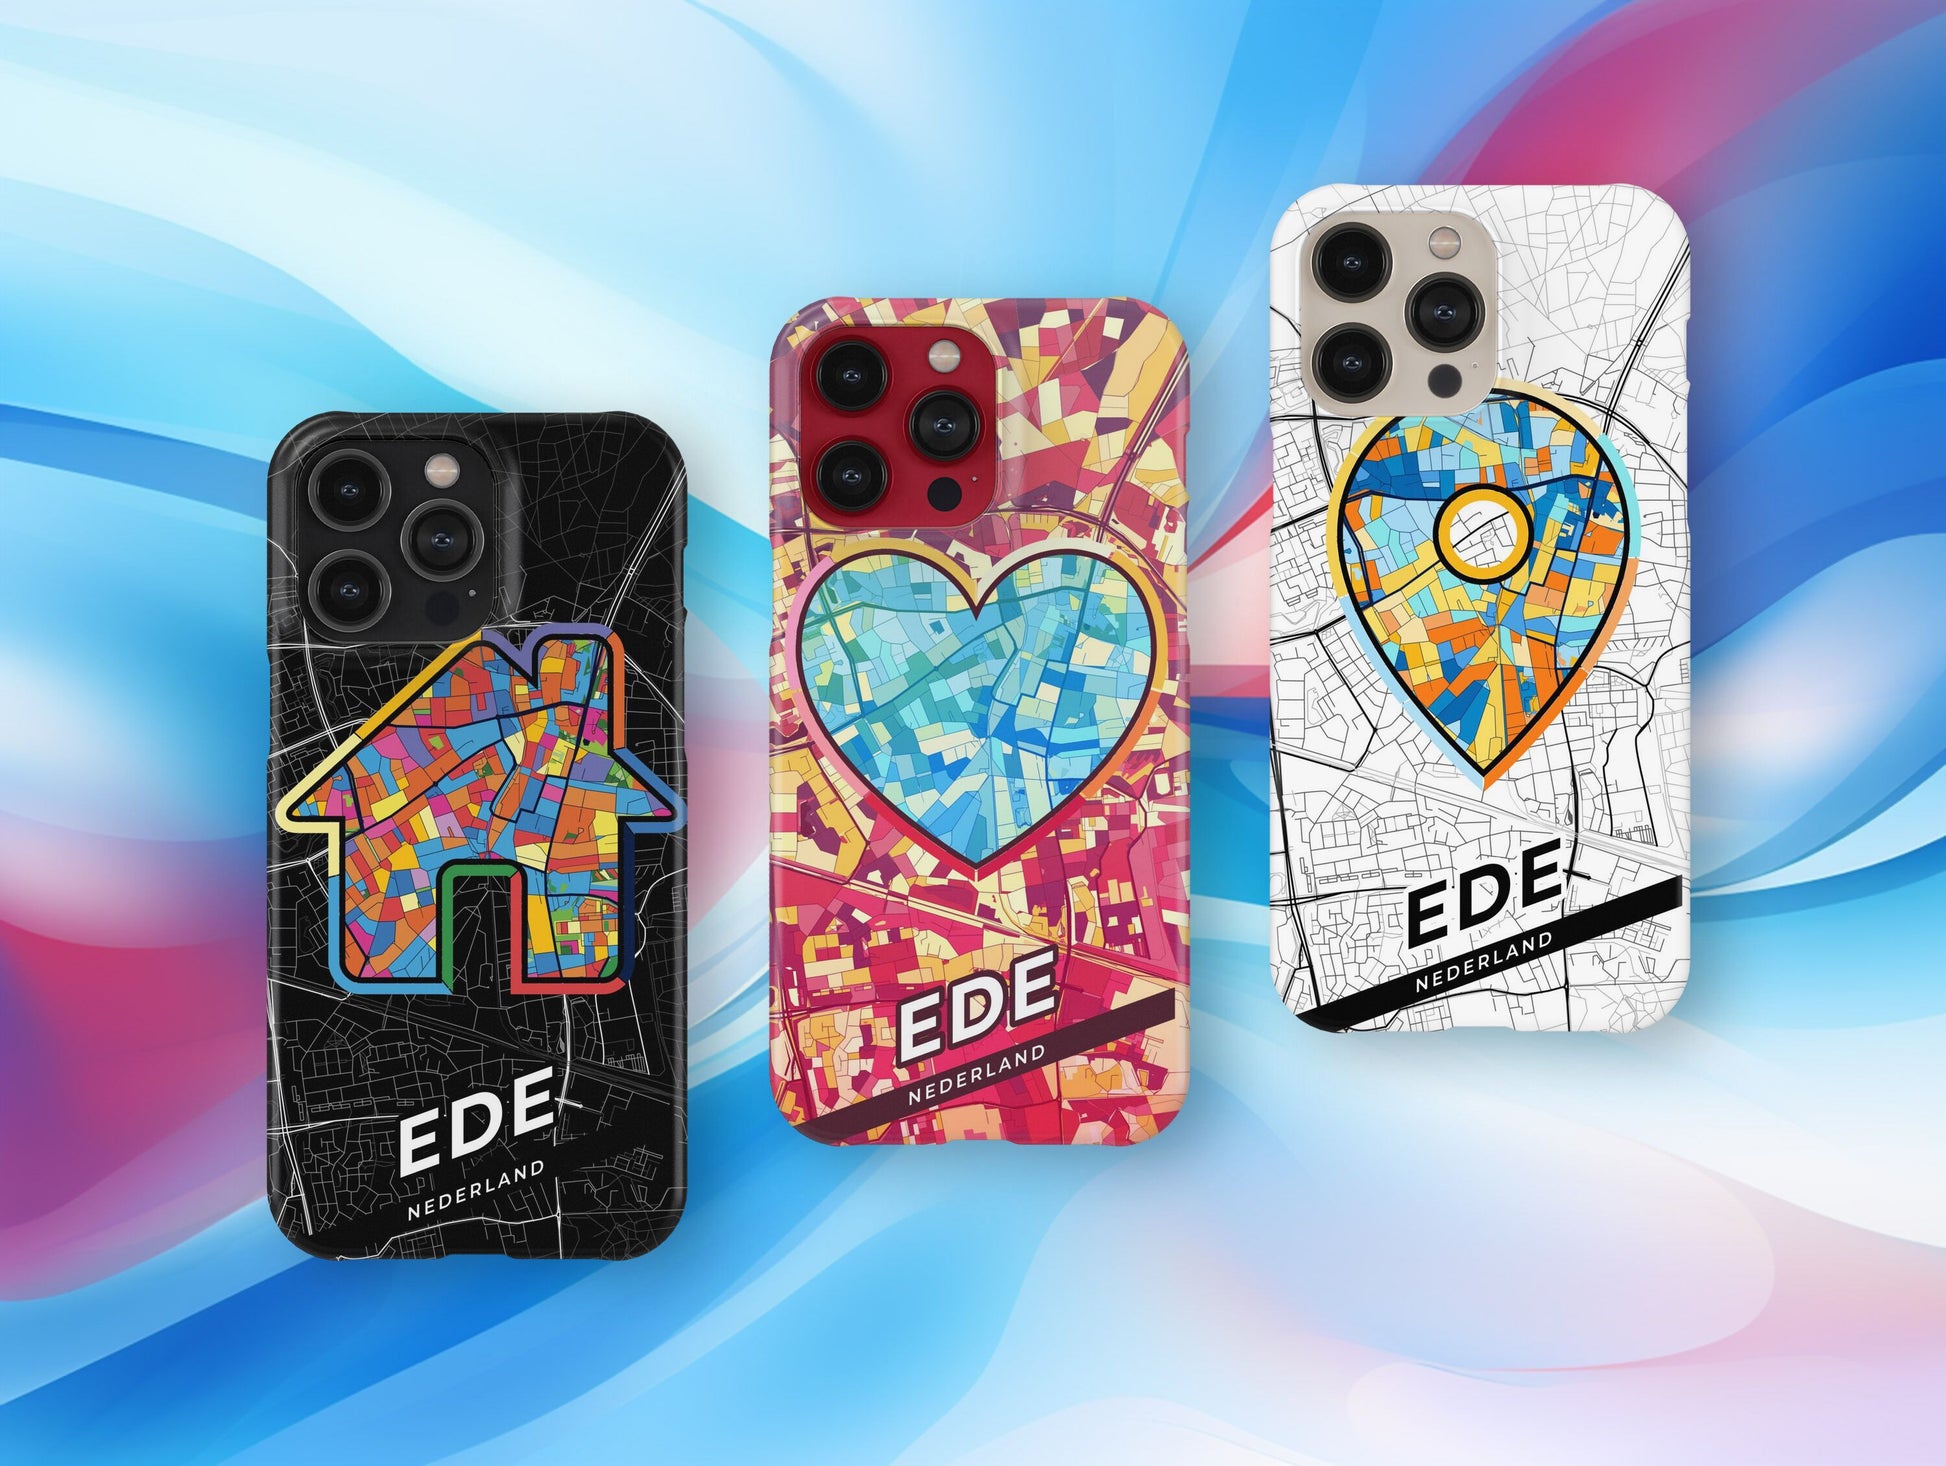 Ede Netherlands slim phone case with colorful icon. Birthday, wedding or housewarming gift. Couple match cases.